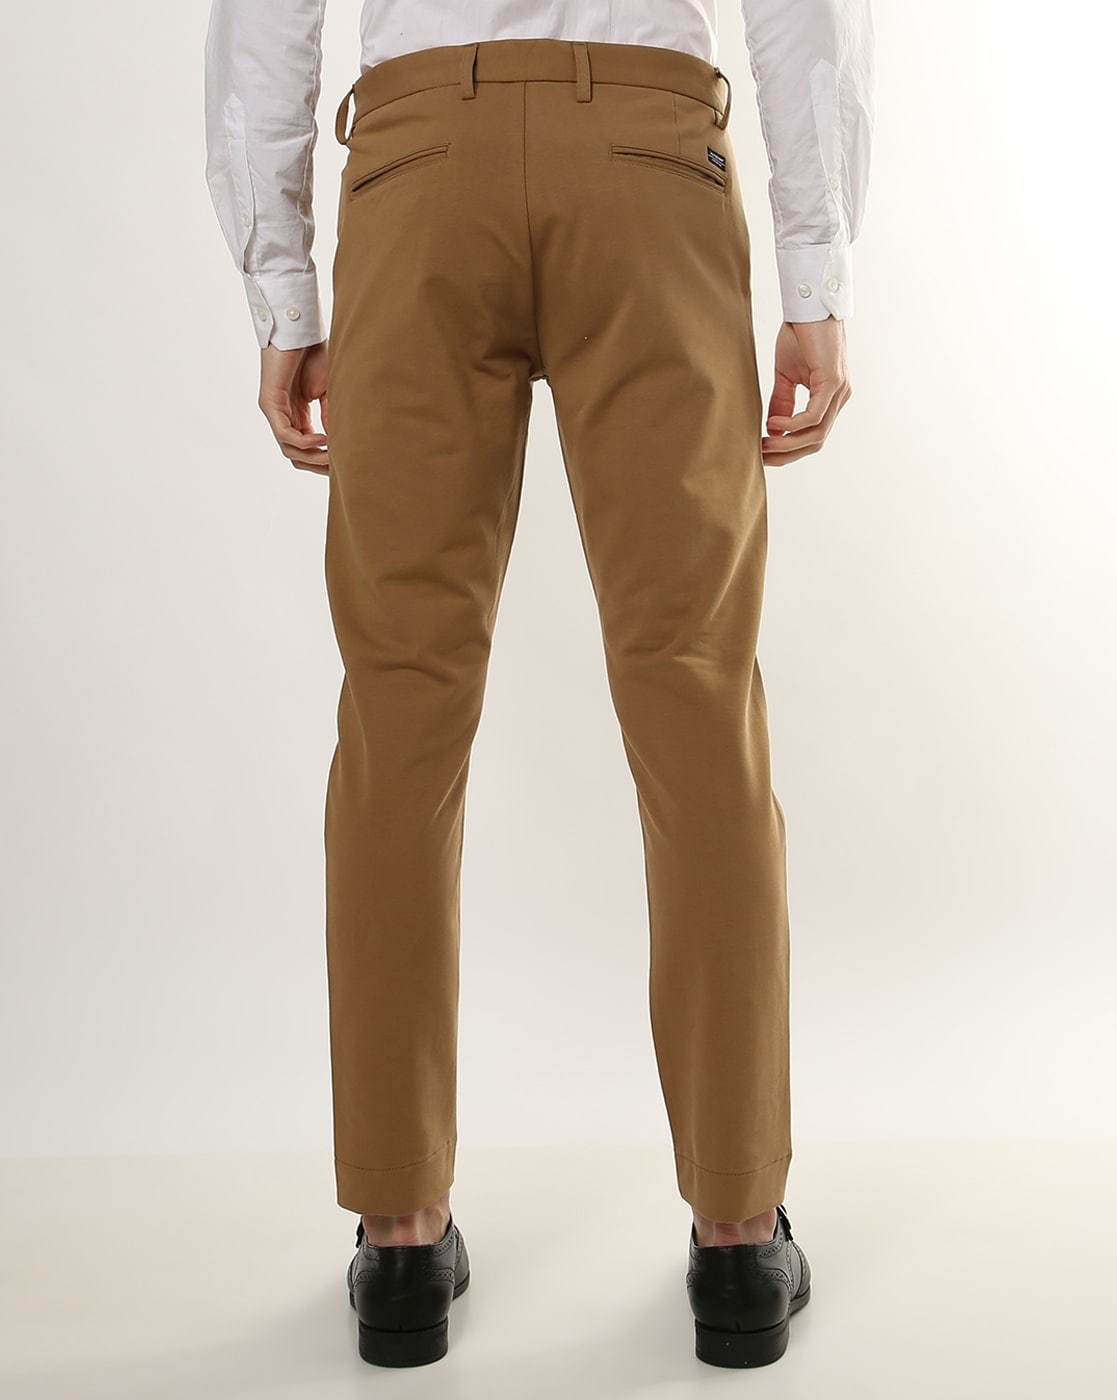 UC NB FASHION FORMAL PANT THE BEST BRAND